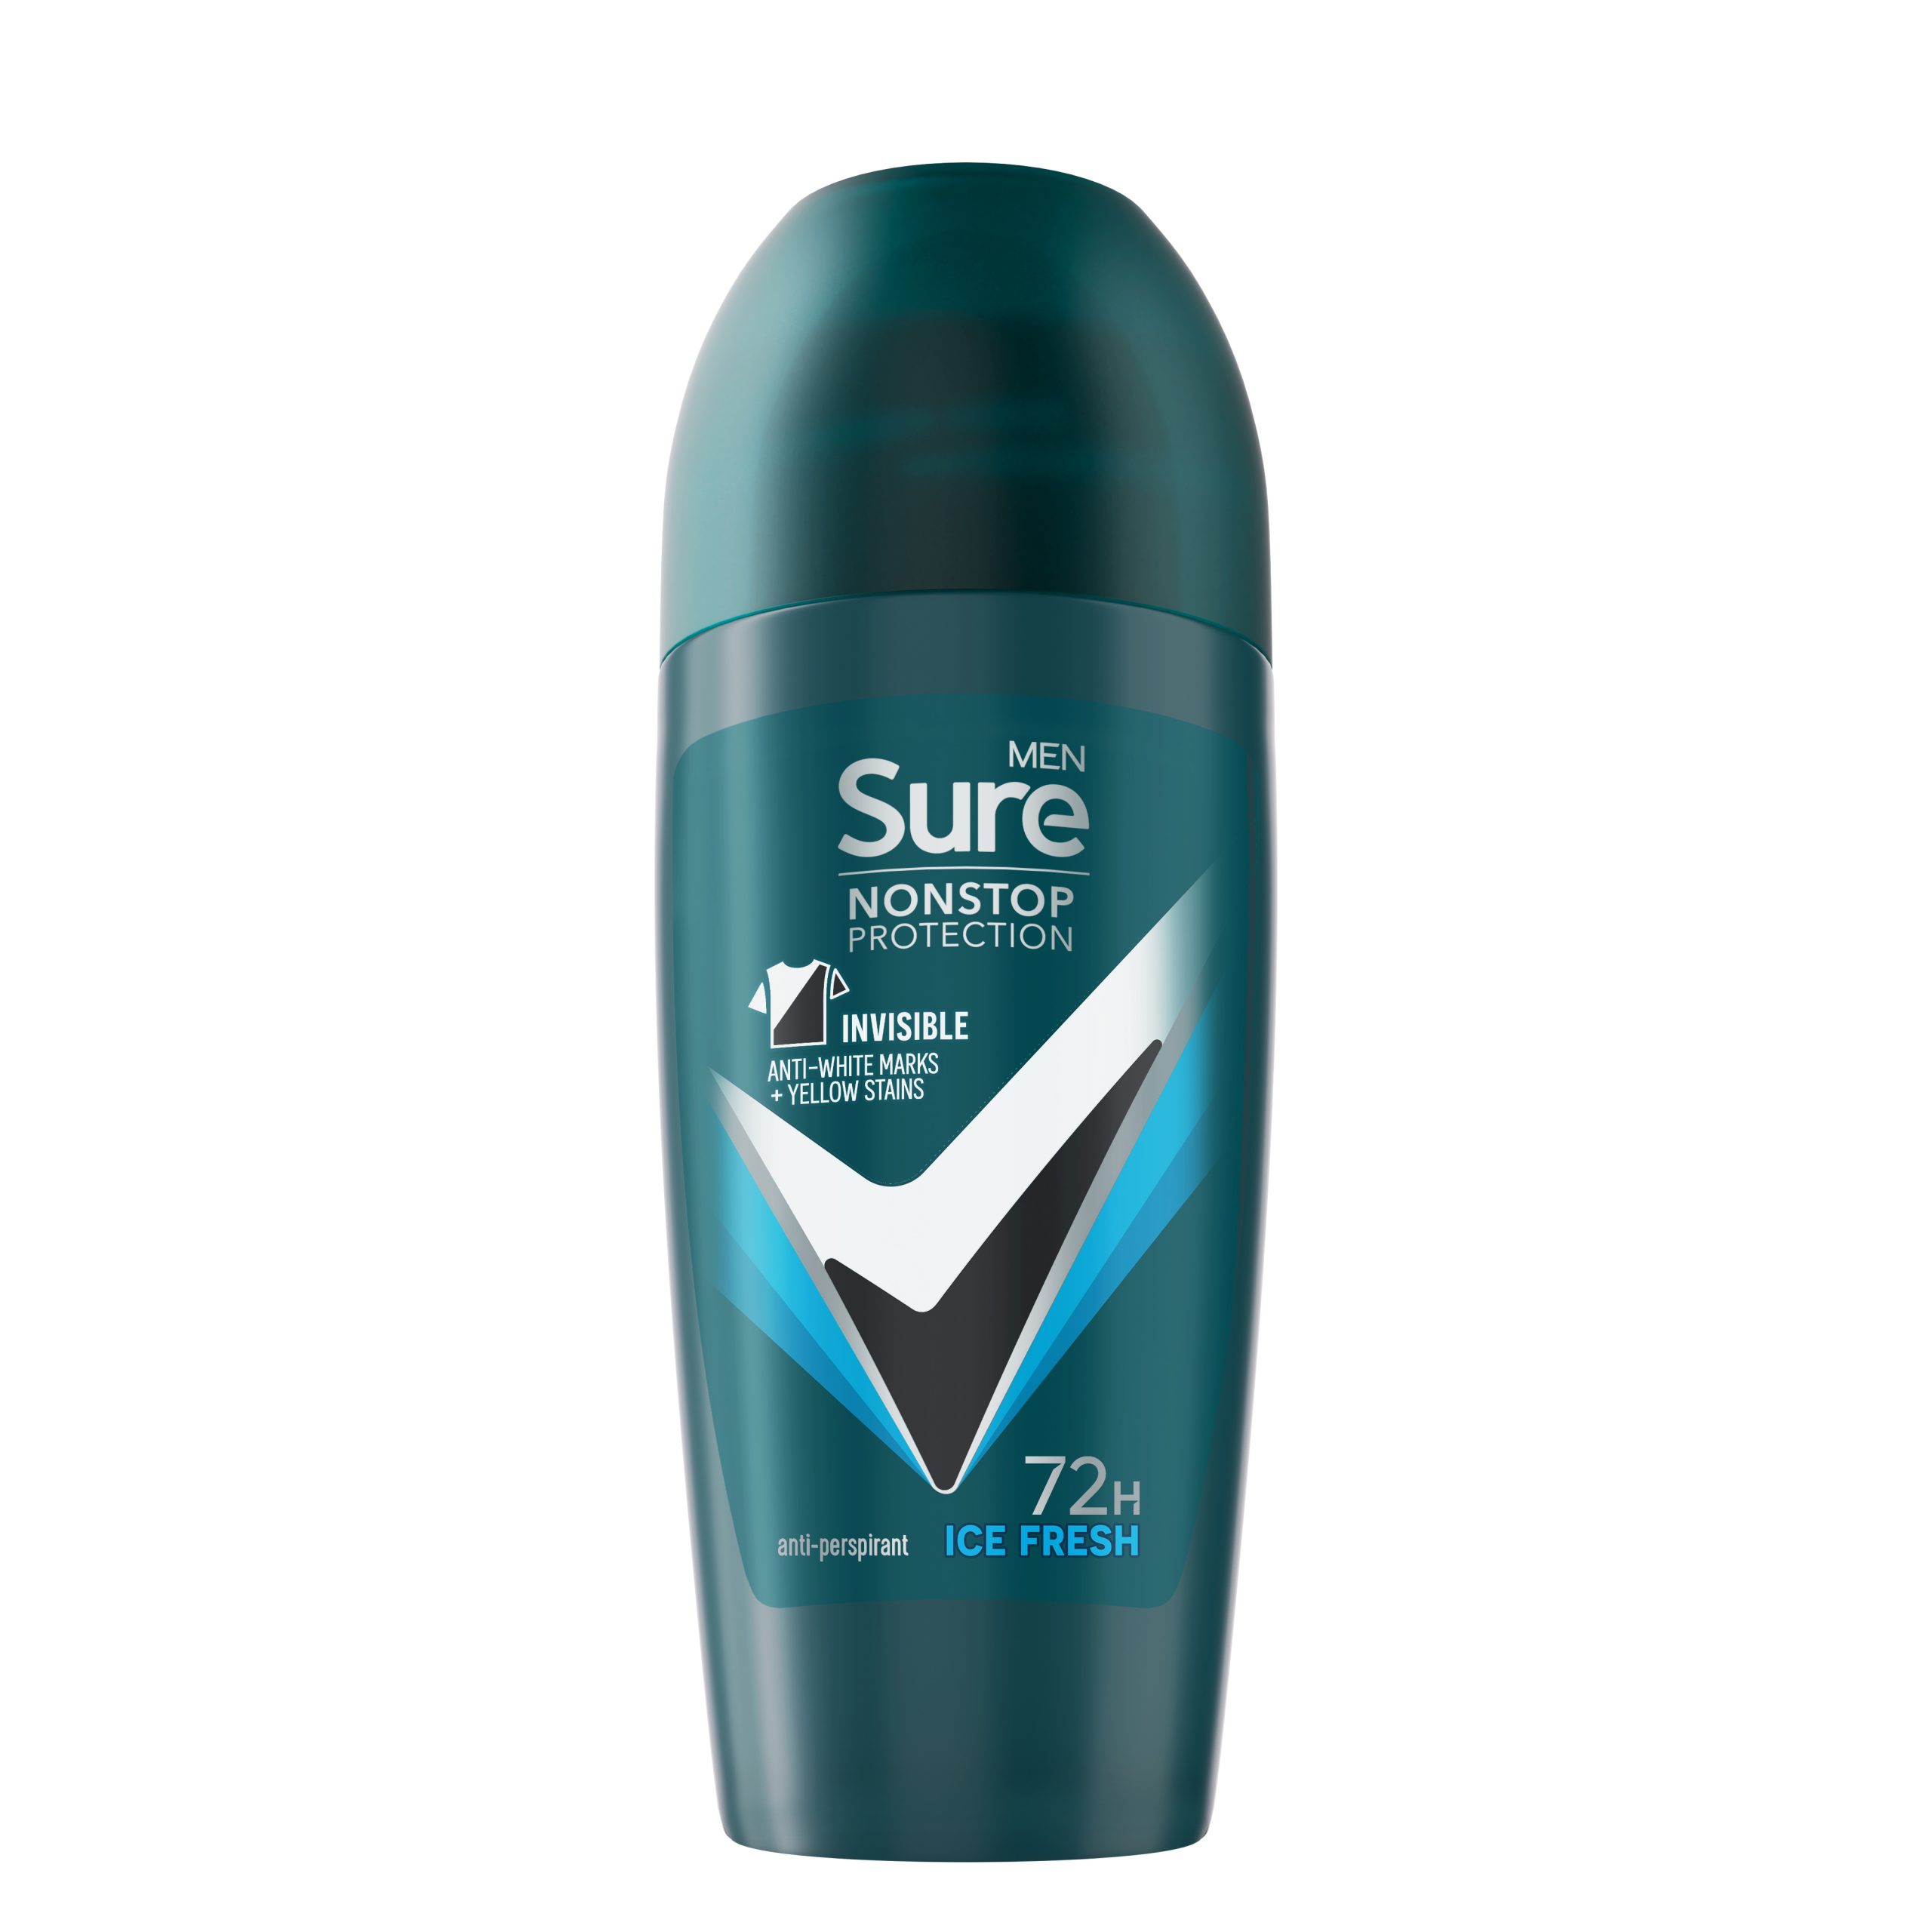 Sure launches 72hr protection into Roll On formats and two new aerosol fragrances